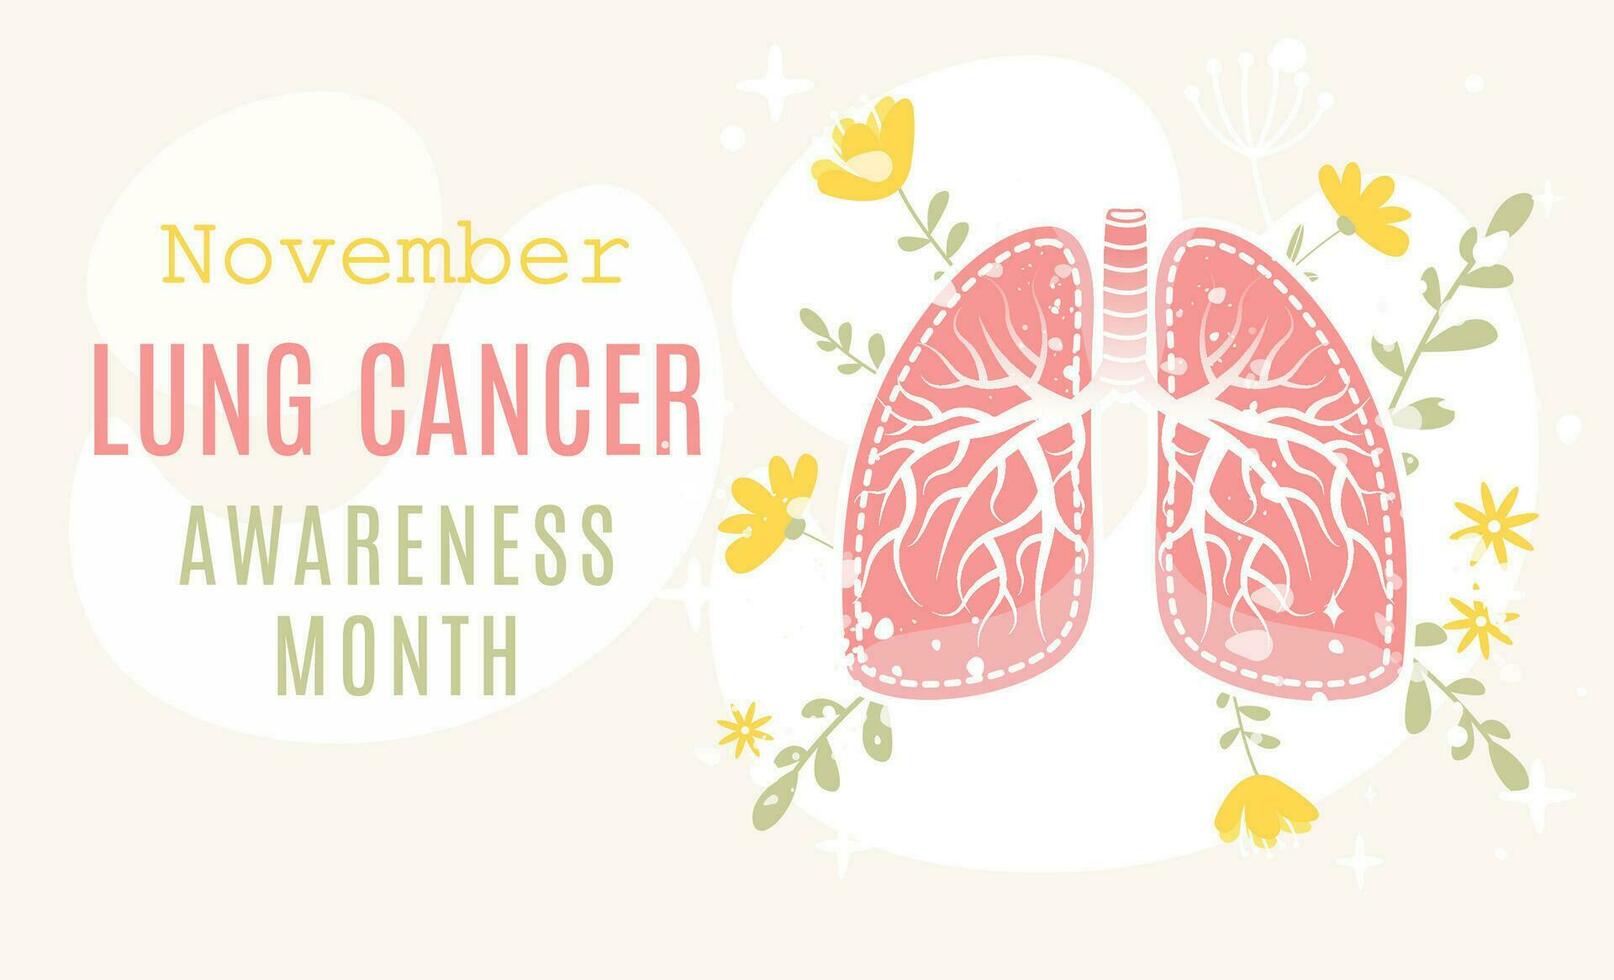 Lung cancer awareness month concept. Vector illustration in flat cartoon style. Perfect for website, banner, poster and so on. Human lungs with flowers and leaves